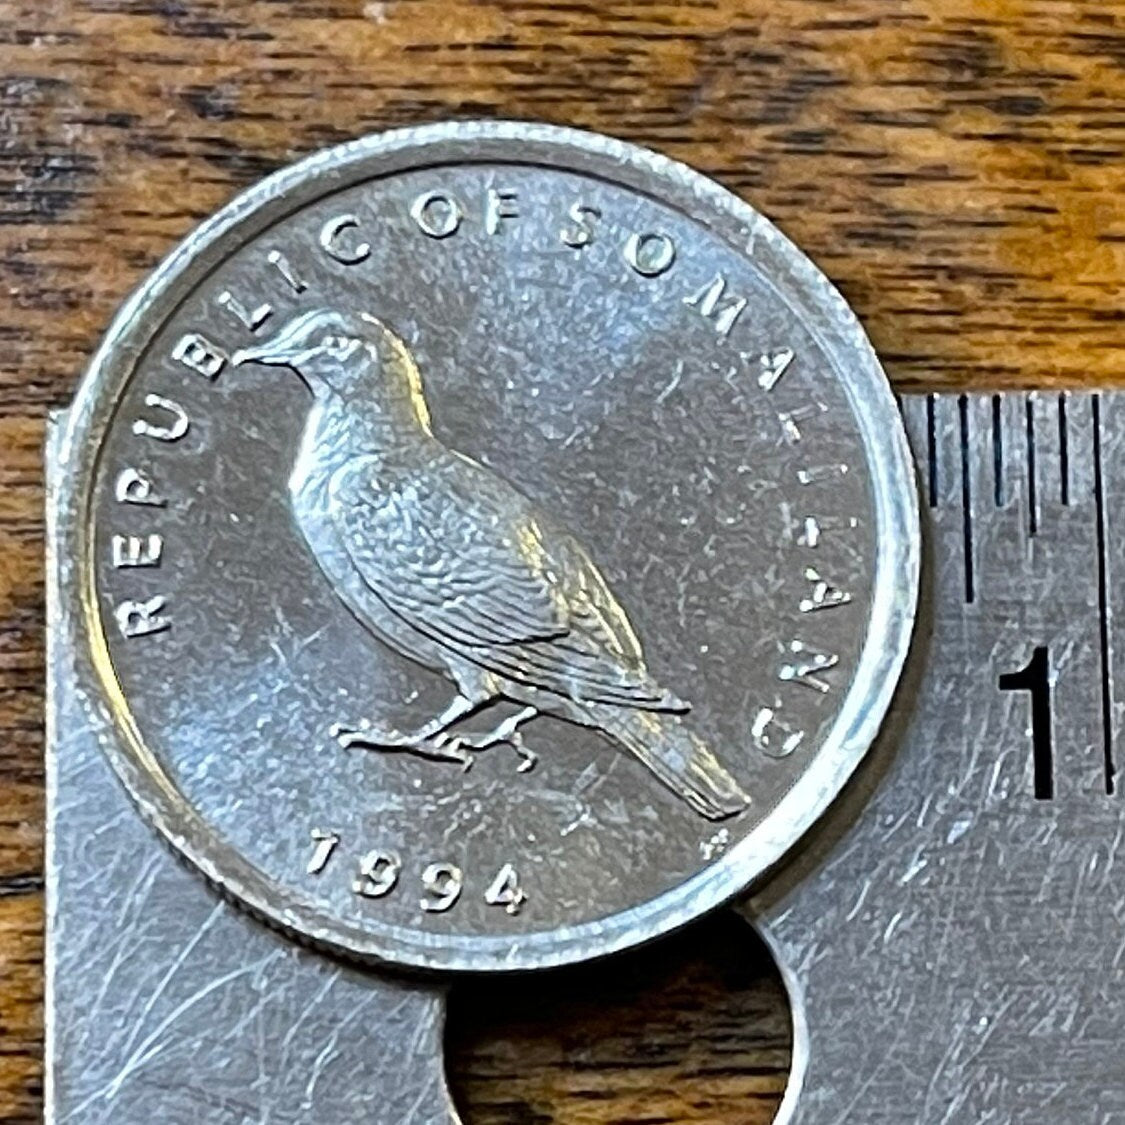 Somali Pigeon 1 Shilling Somaliland Authentic Coin Money for Jewelry and Craft Making